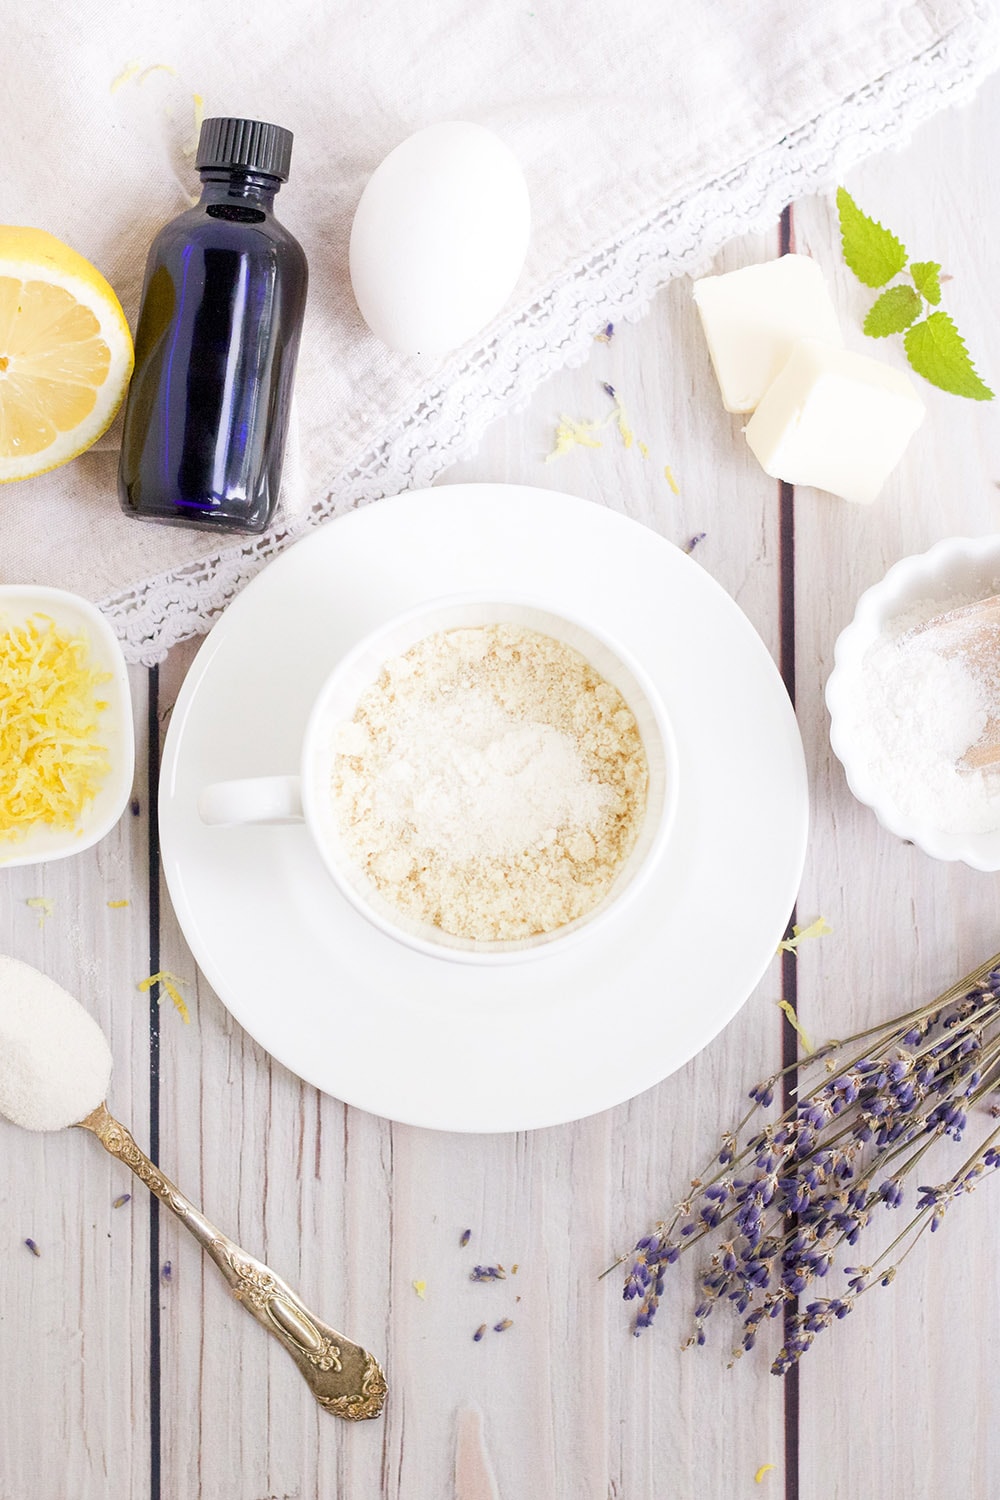 Dry ingredients in mug with dried lavender, lemon, and other ingredients on table.